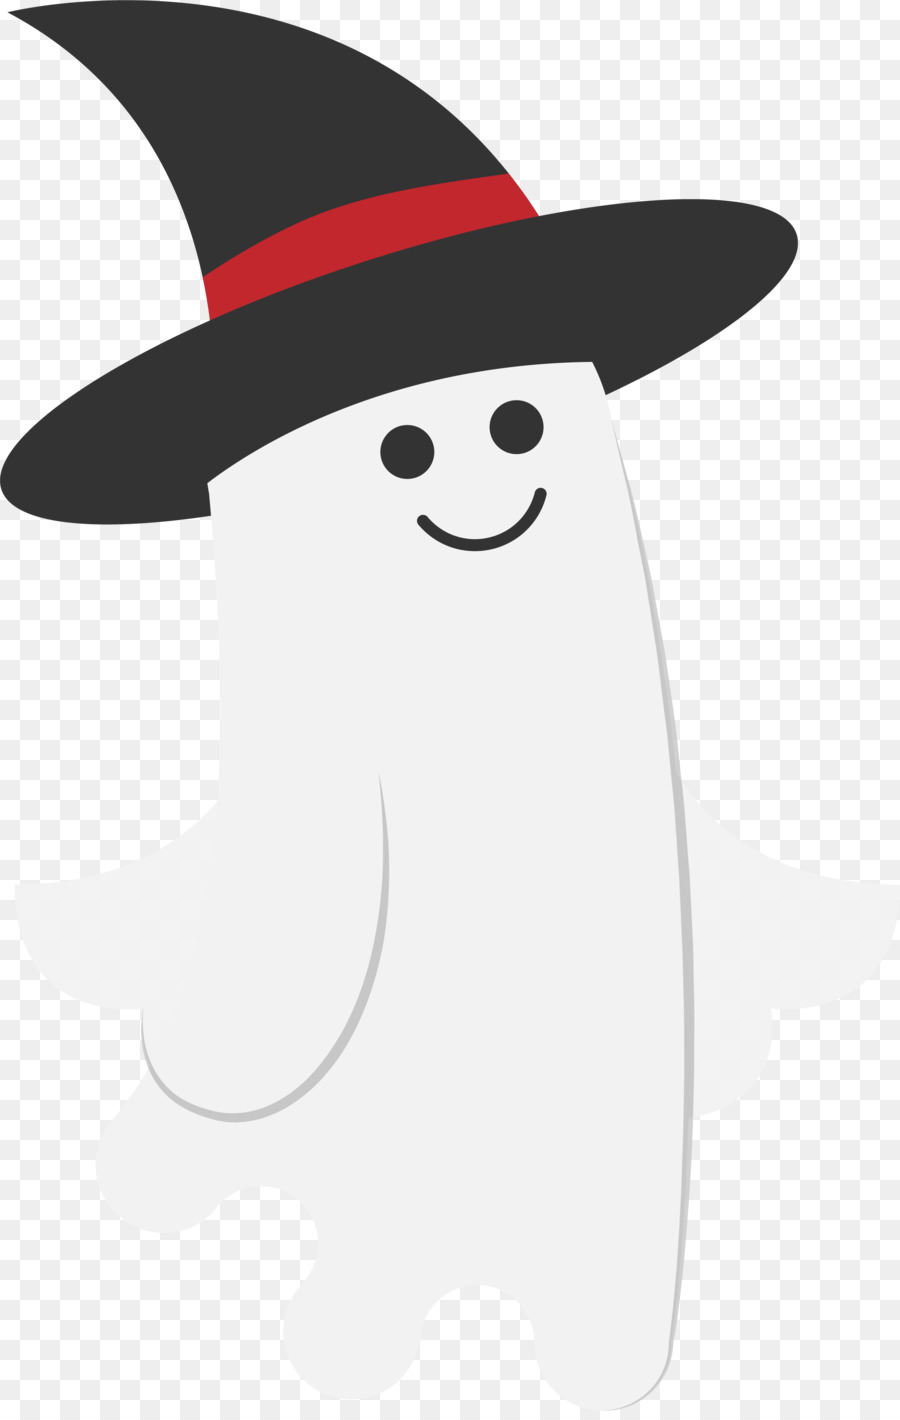 White Ghost Clip art - Halloween white cute ghost png download - 2365*3707 - Free Transparent White png Download.